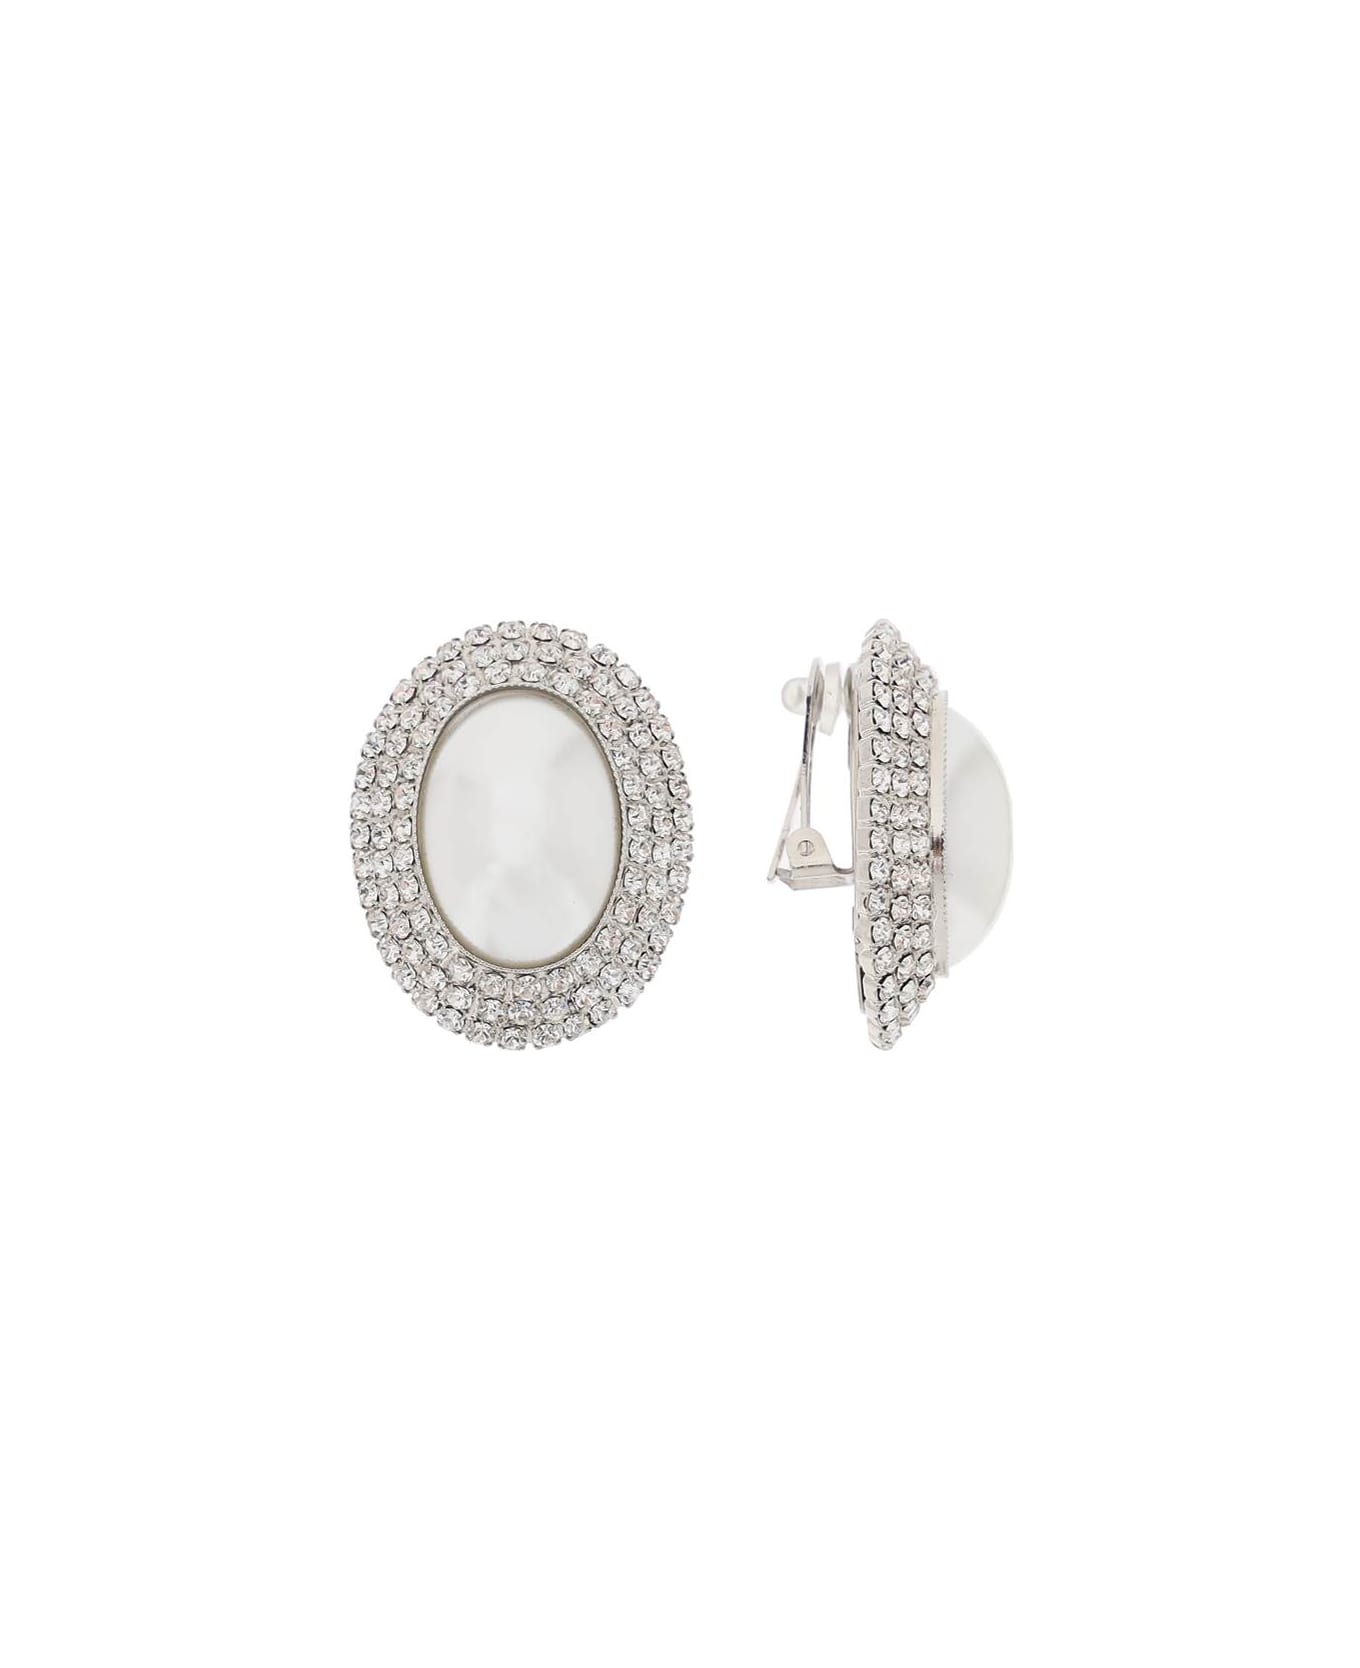 Alessandra Rich Oval Earrings With Pearl And Crystals - CRY SILVER (Silver) イヤリング